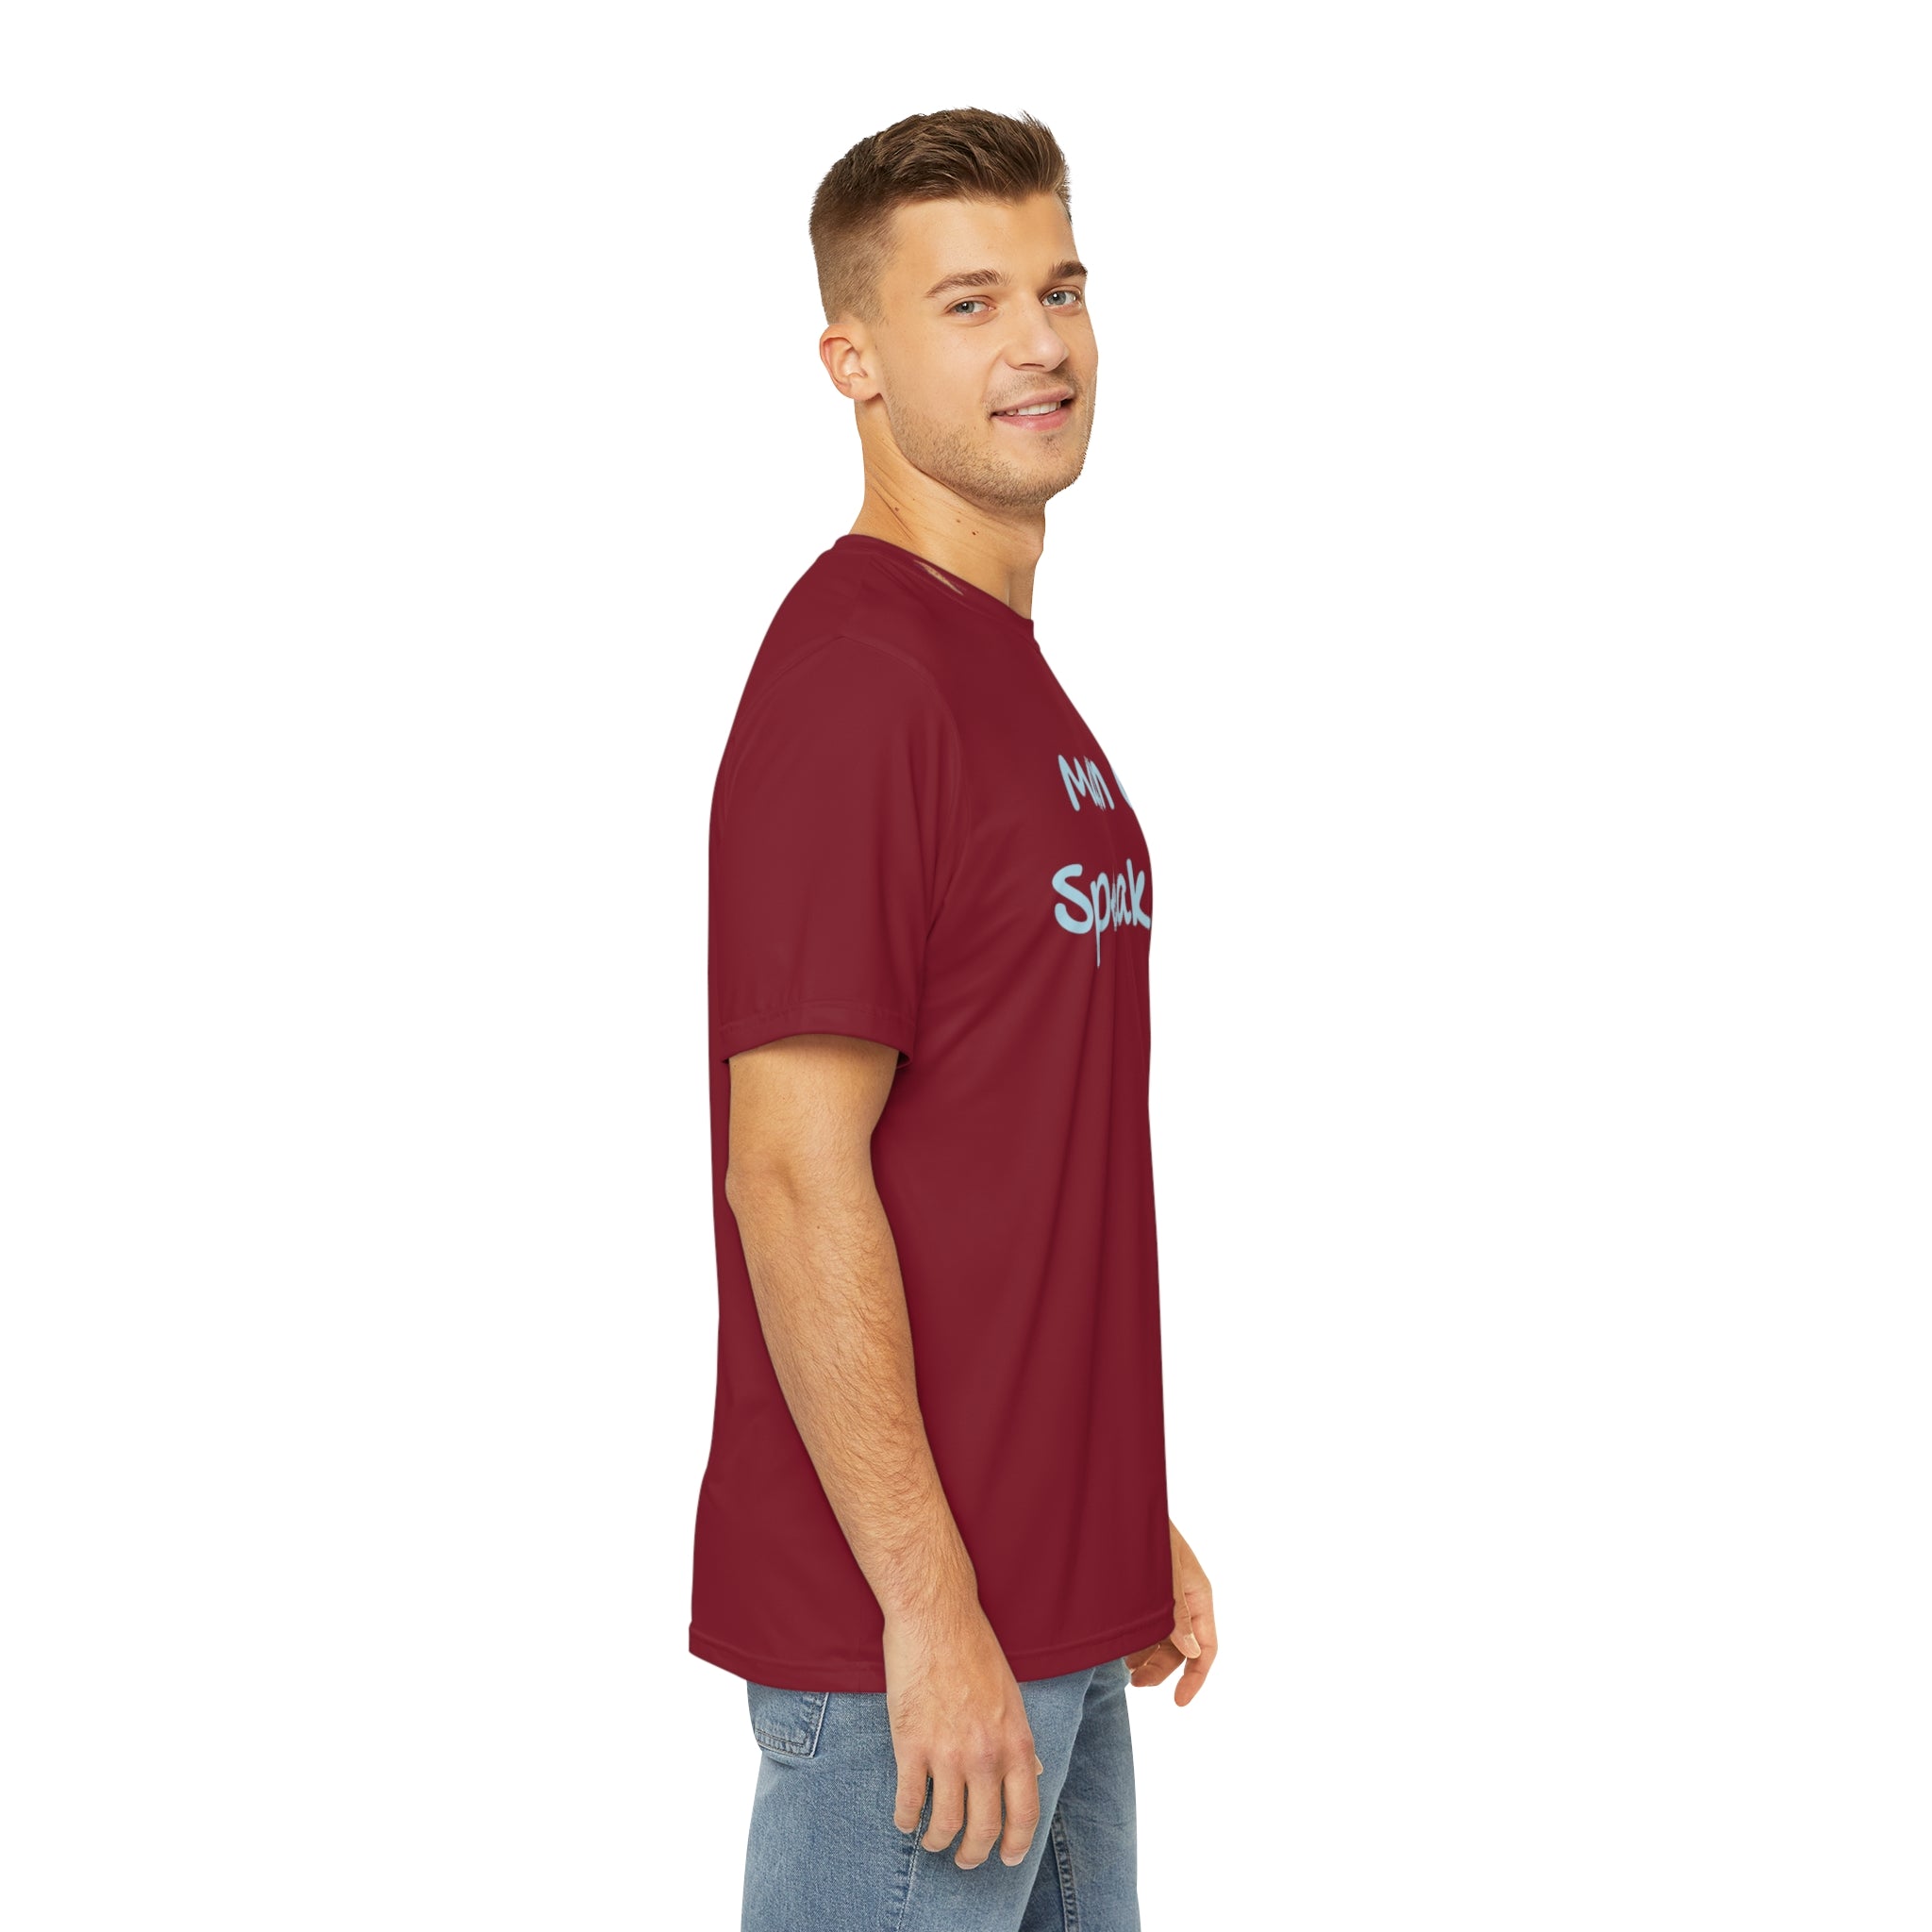 Man Up Speak Up T-shirt: Strength in Expression Athleisure Wear Mental Health Pledge Donation Polyester Style Support All Over Prints 10044967606374949135_2048 Printify